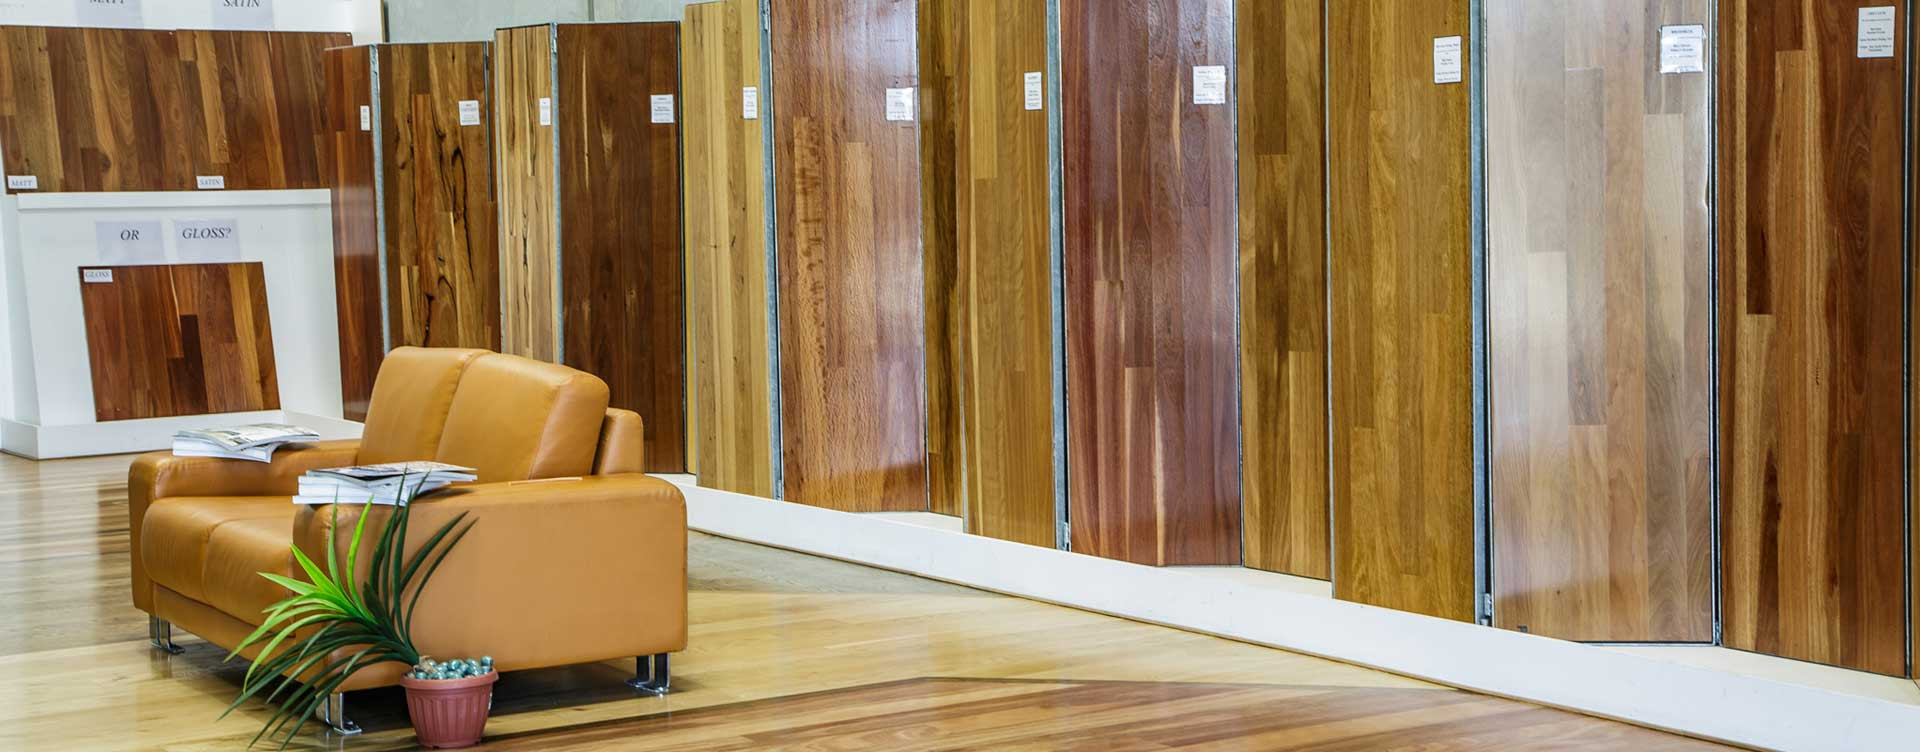 18 Elegant Hardwood Floor Refinishing Whitby 2024 free download hardwood floor refinishing whitby of timber flooring perth coastal flooring wa quality wooden pertaining to fully trained and friendly staff to assist with every aspect of your query